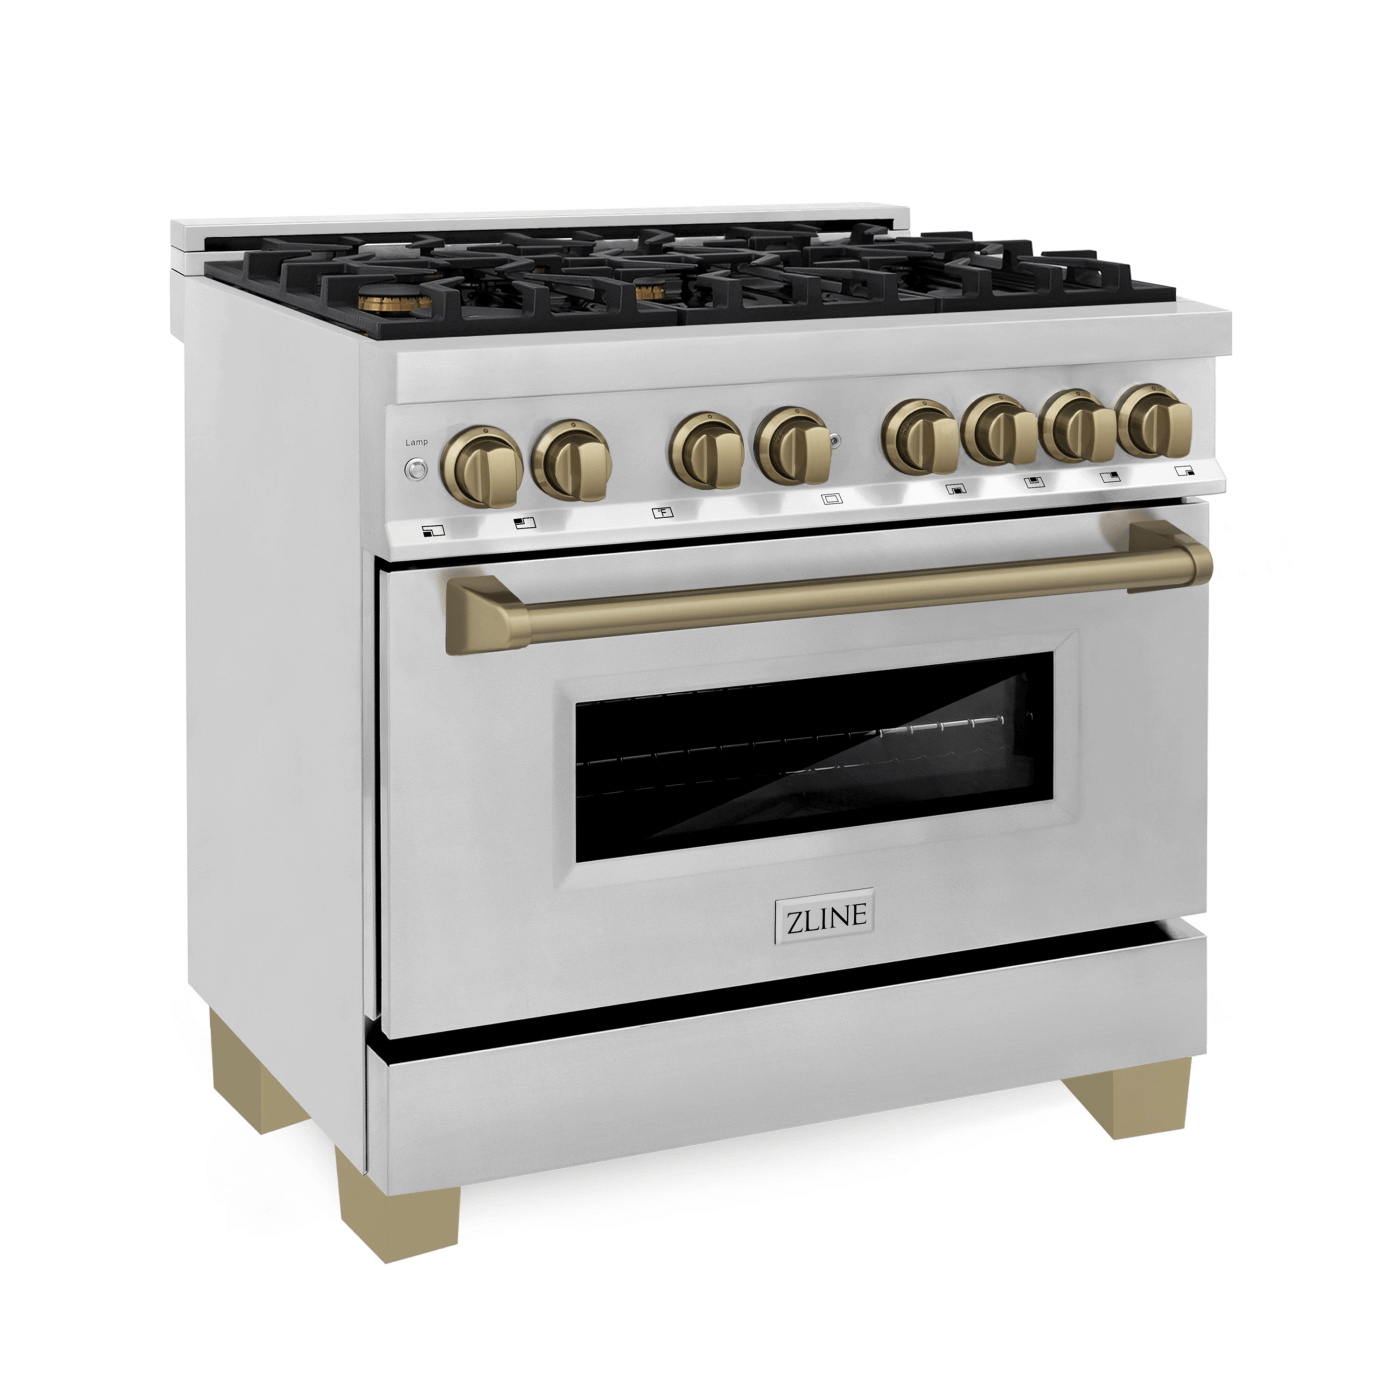 ZLINE Autograph Edition 36 in. 4.6 cu. ft. Dual Fuel Range with Gas Stove and Electric Oven in Stainless Steel with Champagne Bronze Accents  - white background